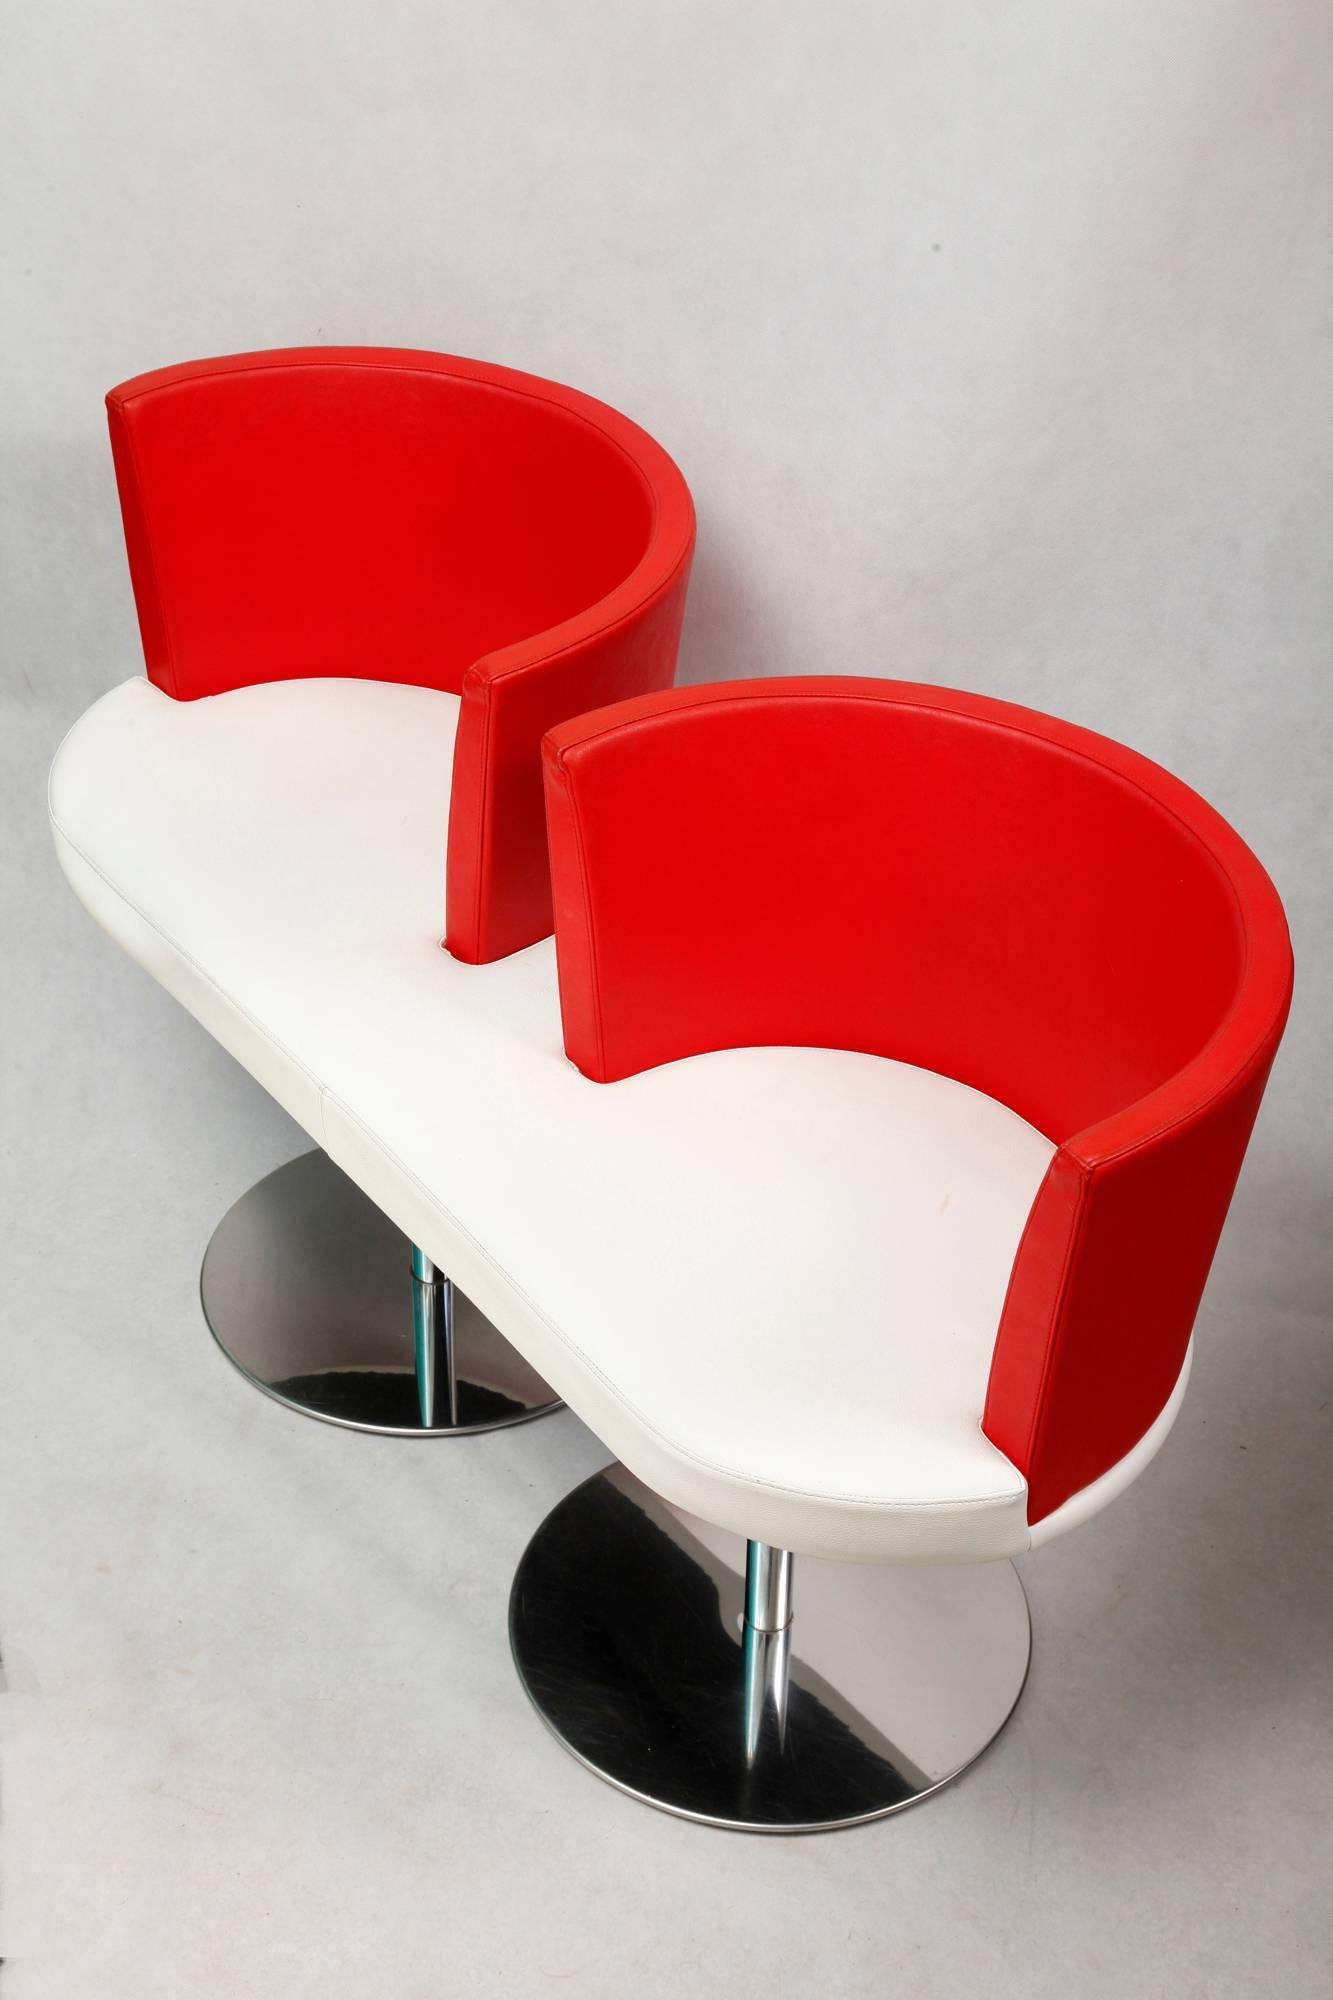 English Double Leather Armchair, Red and White, England, 1980s For Sale